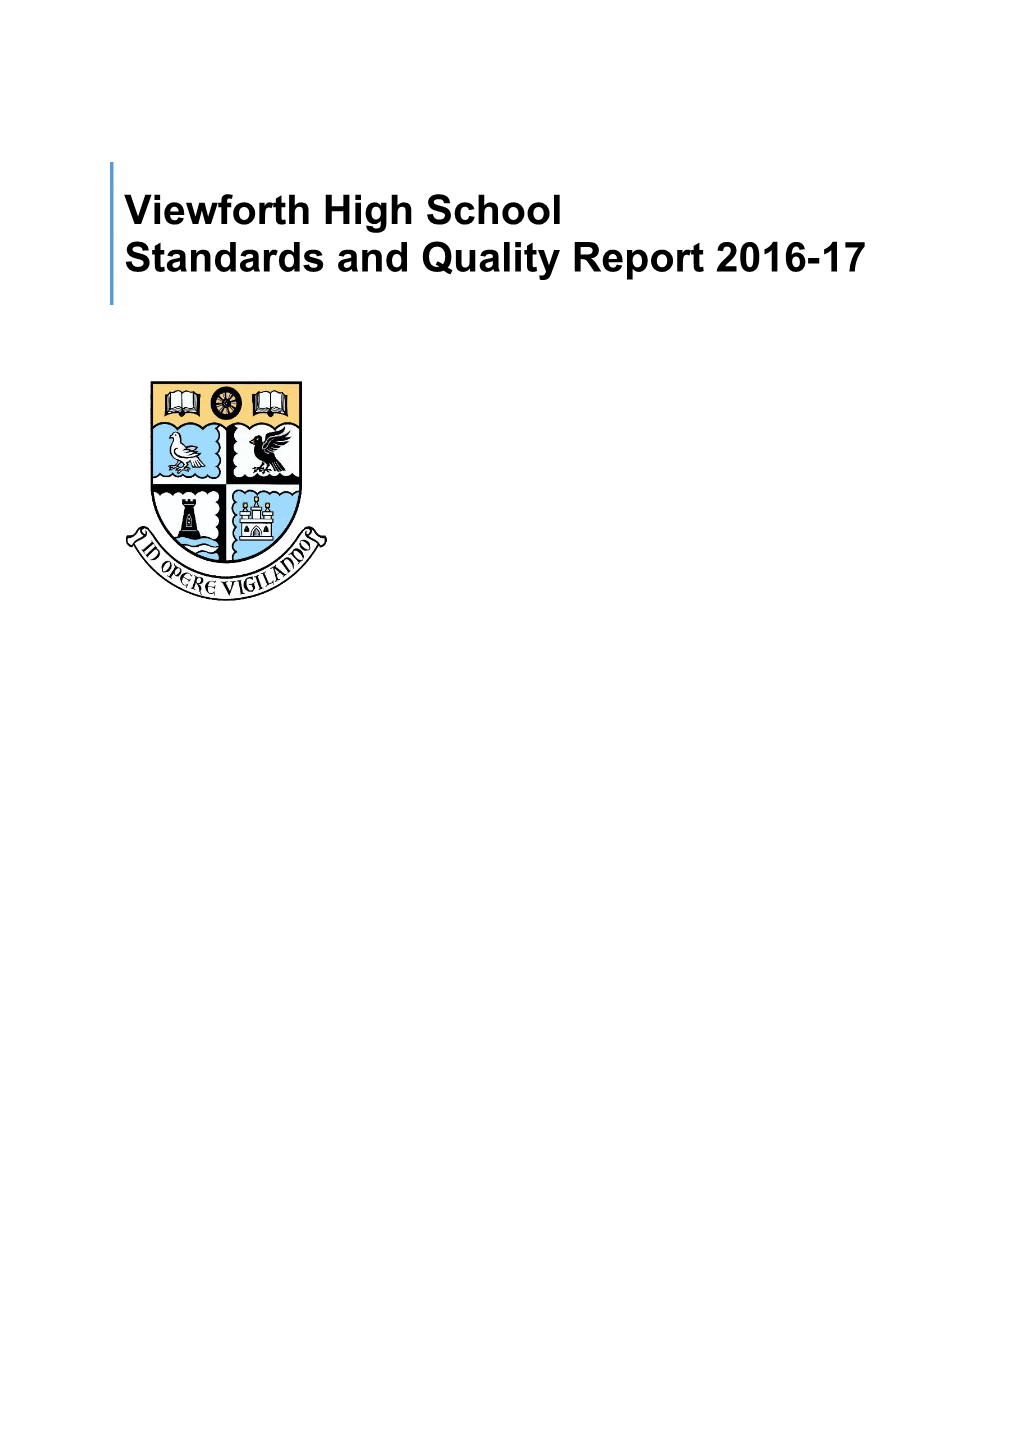 Standards and Quality Report 2016-17